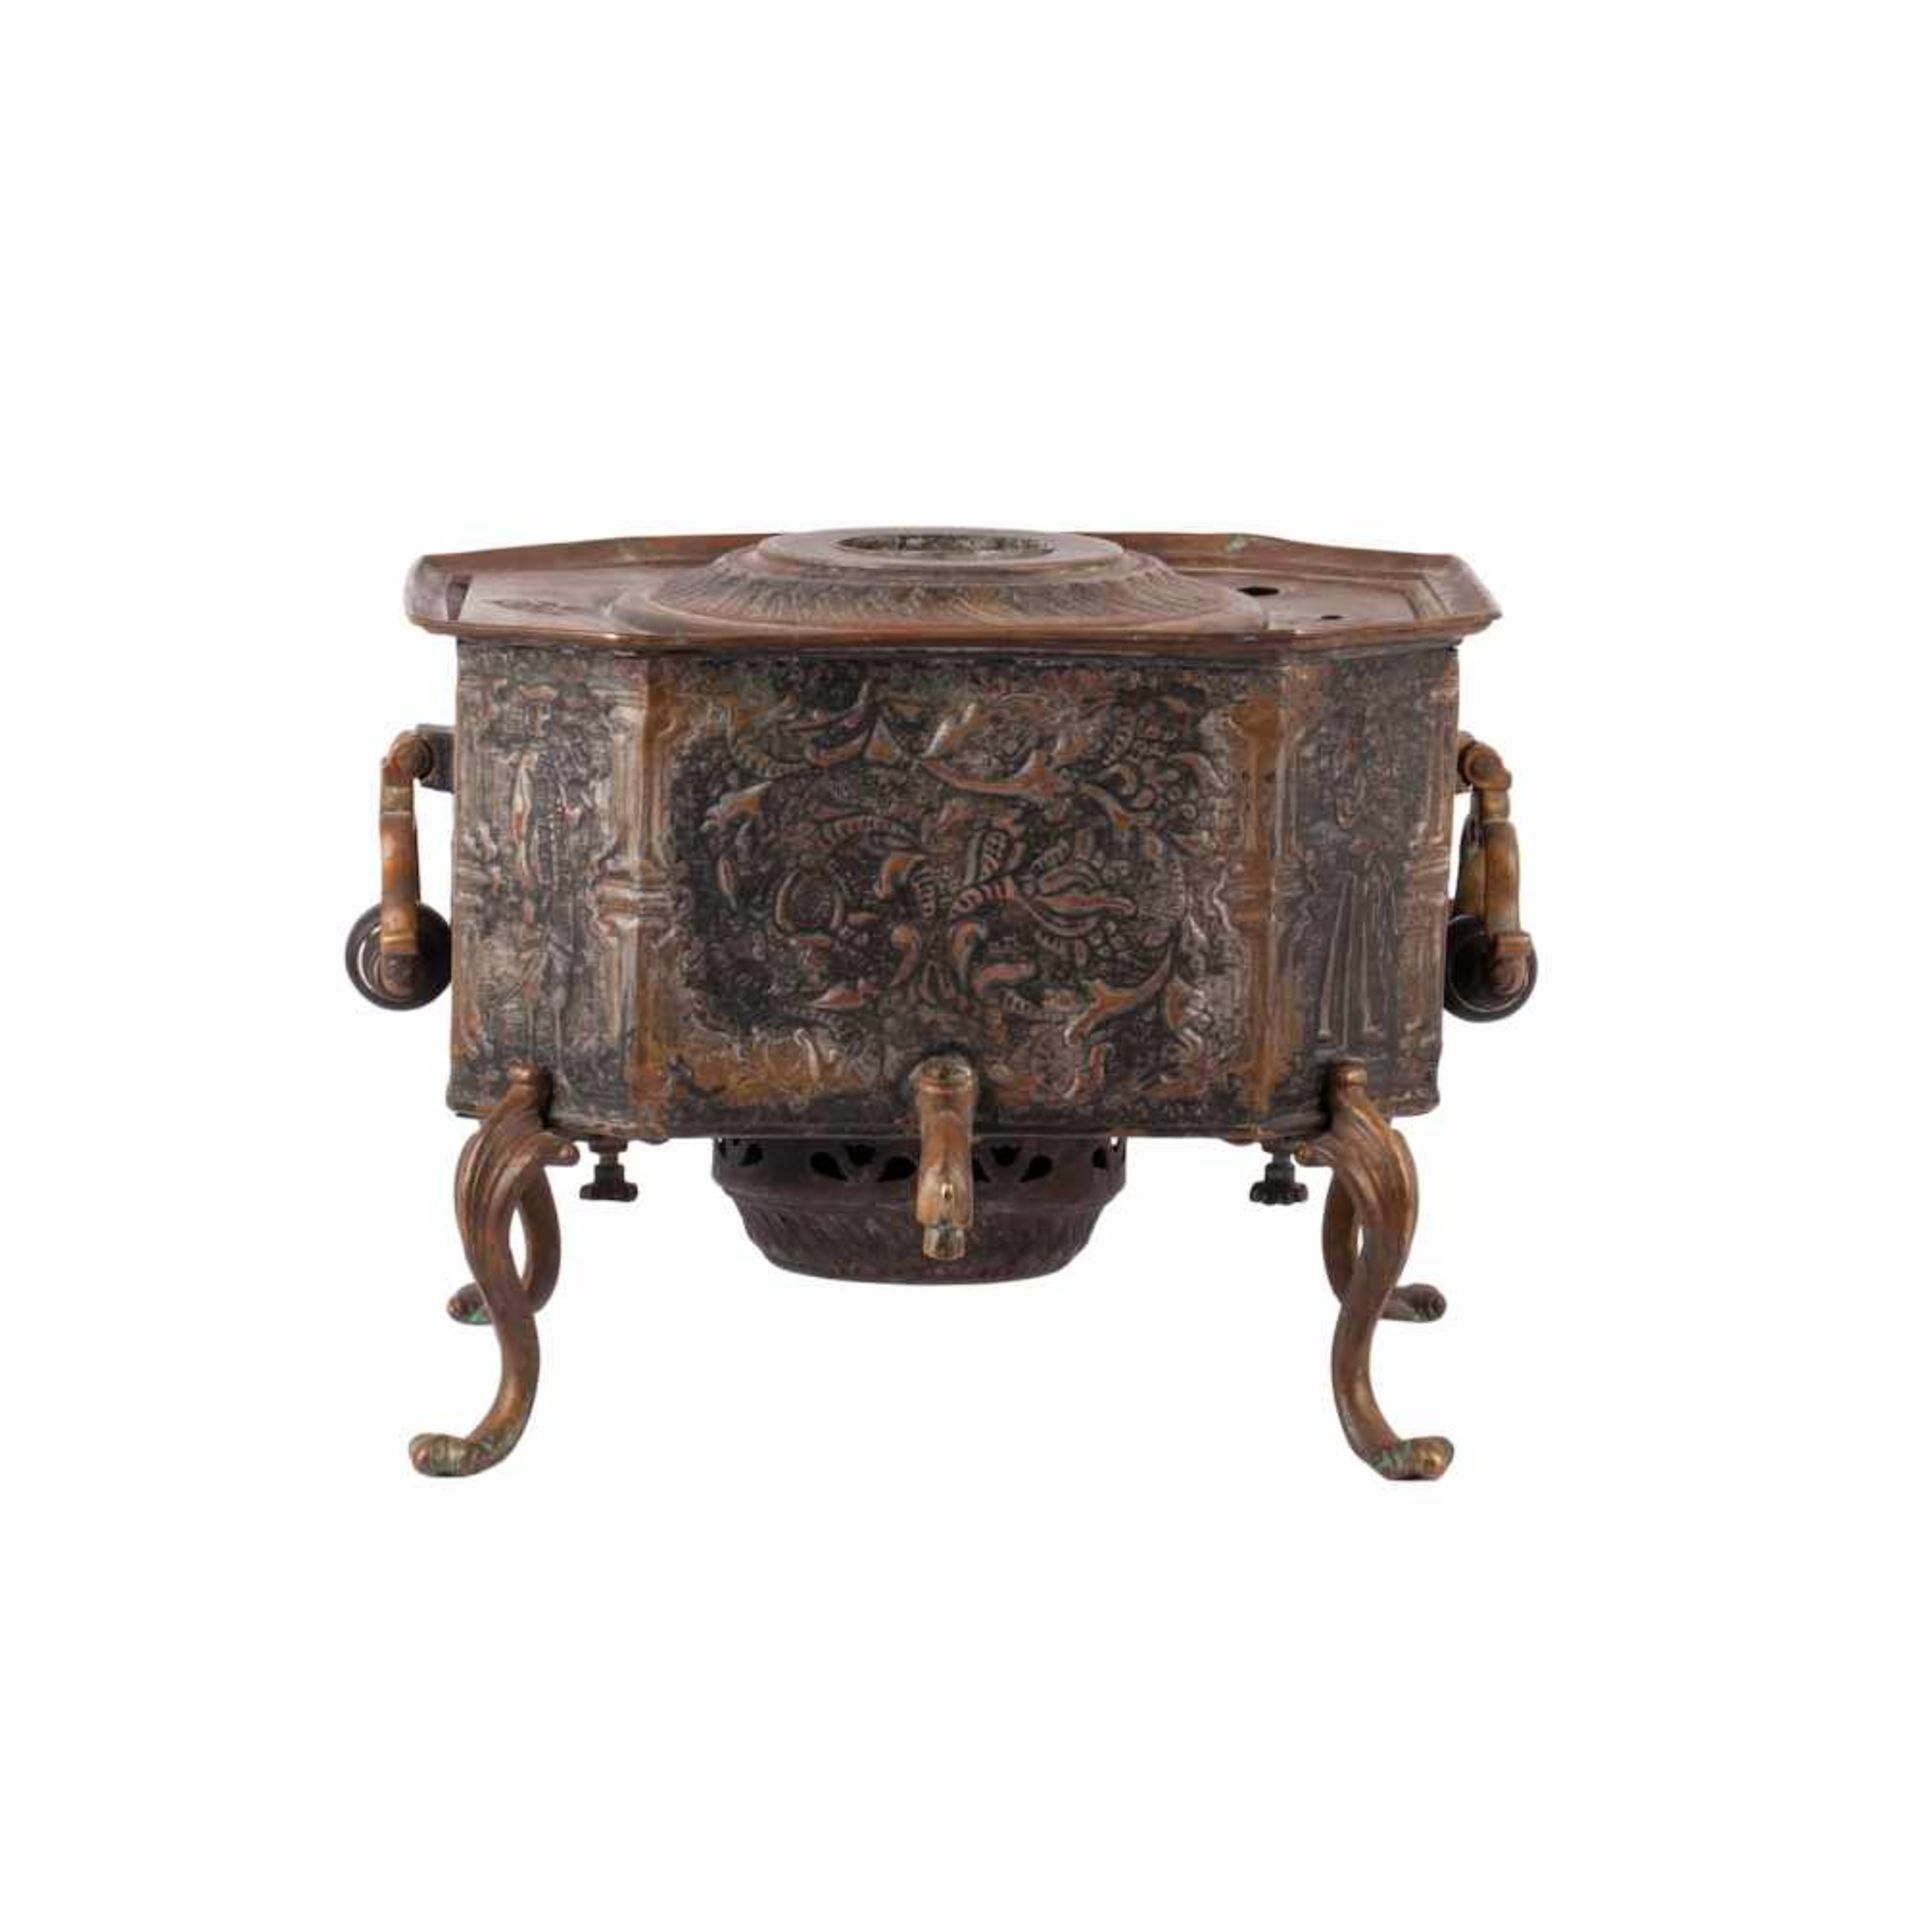 Russian copper traveling samovarRussian traveling samovar in the shape of a coffer. Copper, cast,